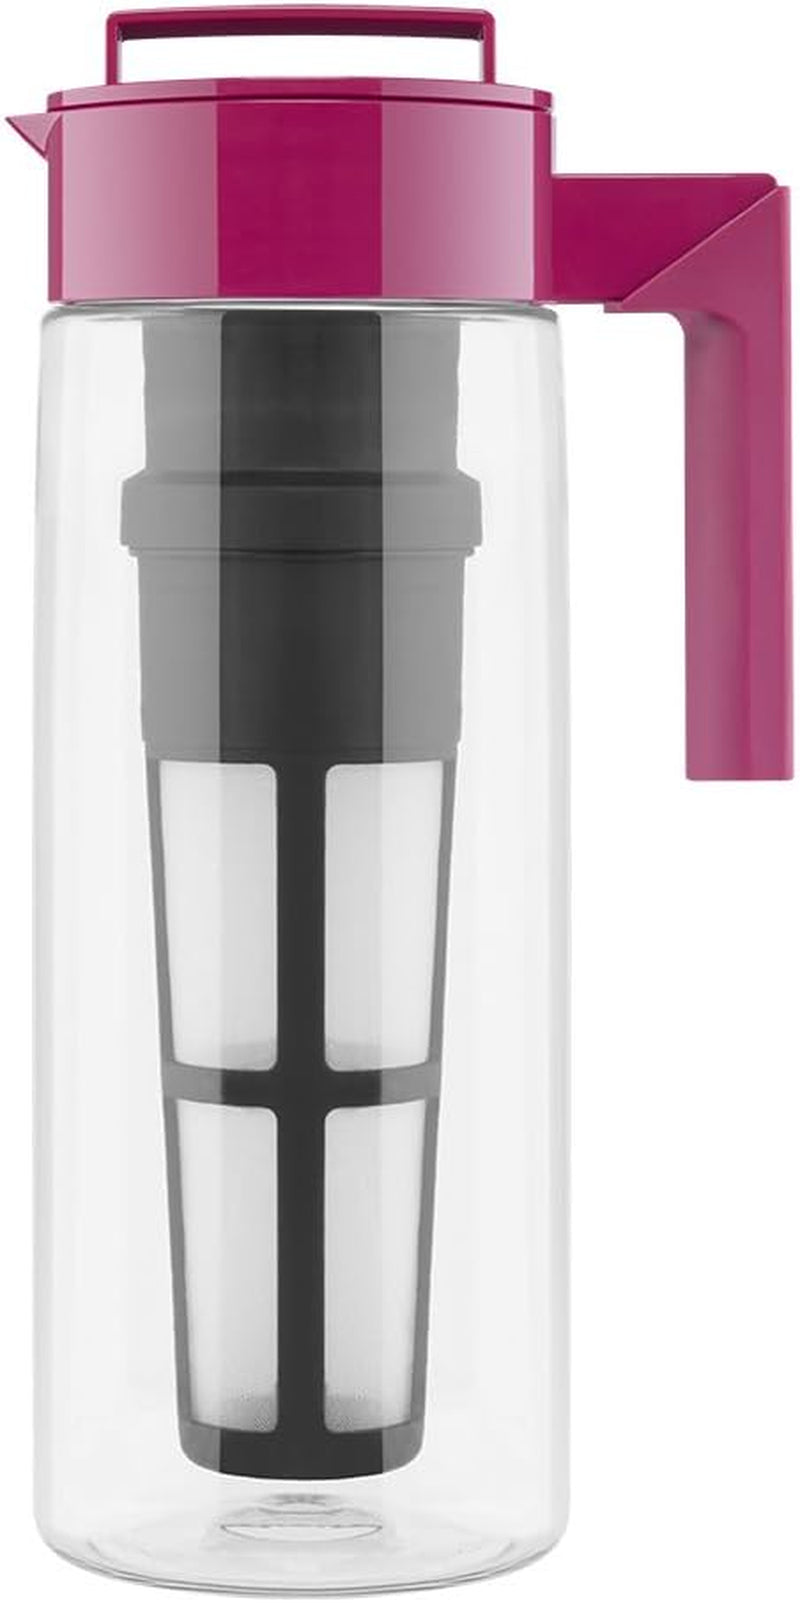 Takeya Iced Tea Maker with Patented Flash Chill Technology Made in USA, 2 Quart, Raspberry & Fruit Infuser